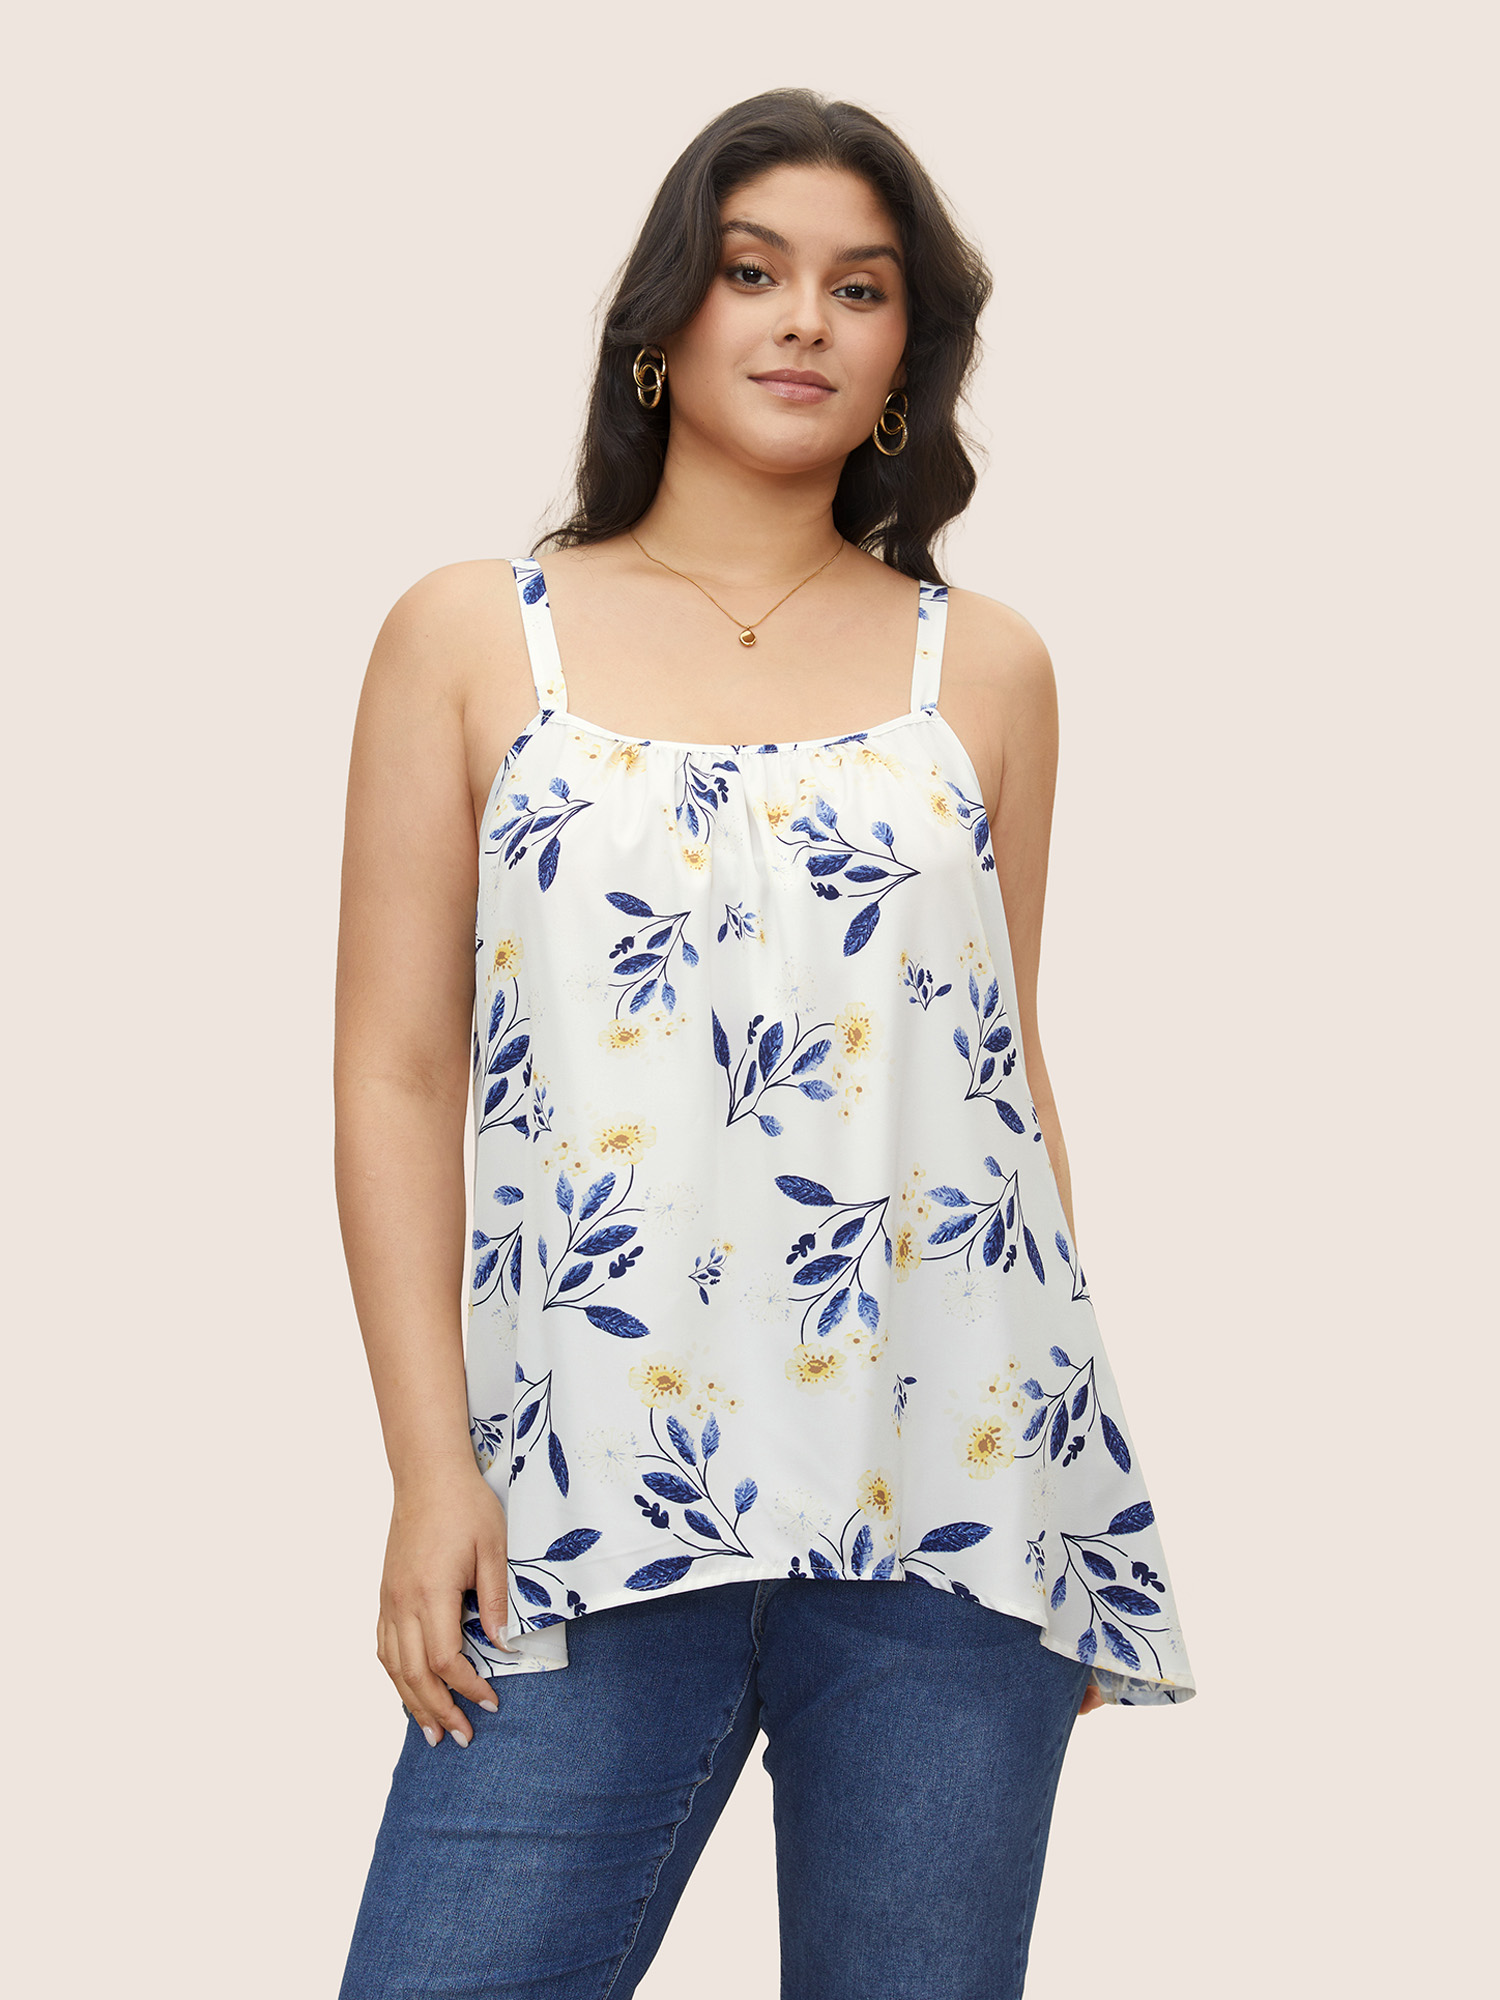 

Plus Size Floral Gathered Adjustable Straps Tank Top Women White Elegant Gathered Everyday Tank Tops Camis BloomChic